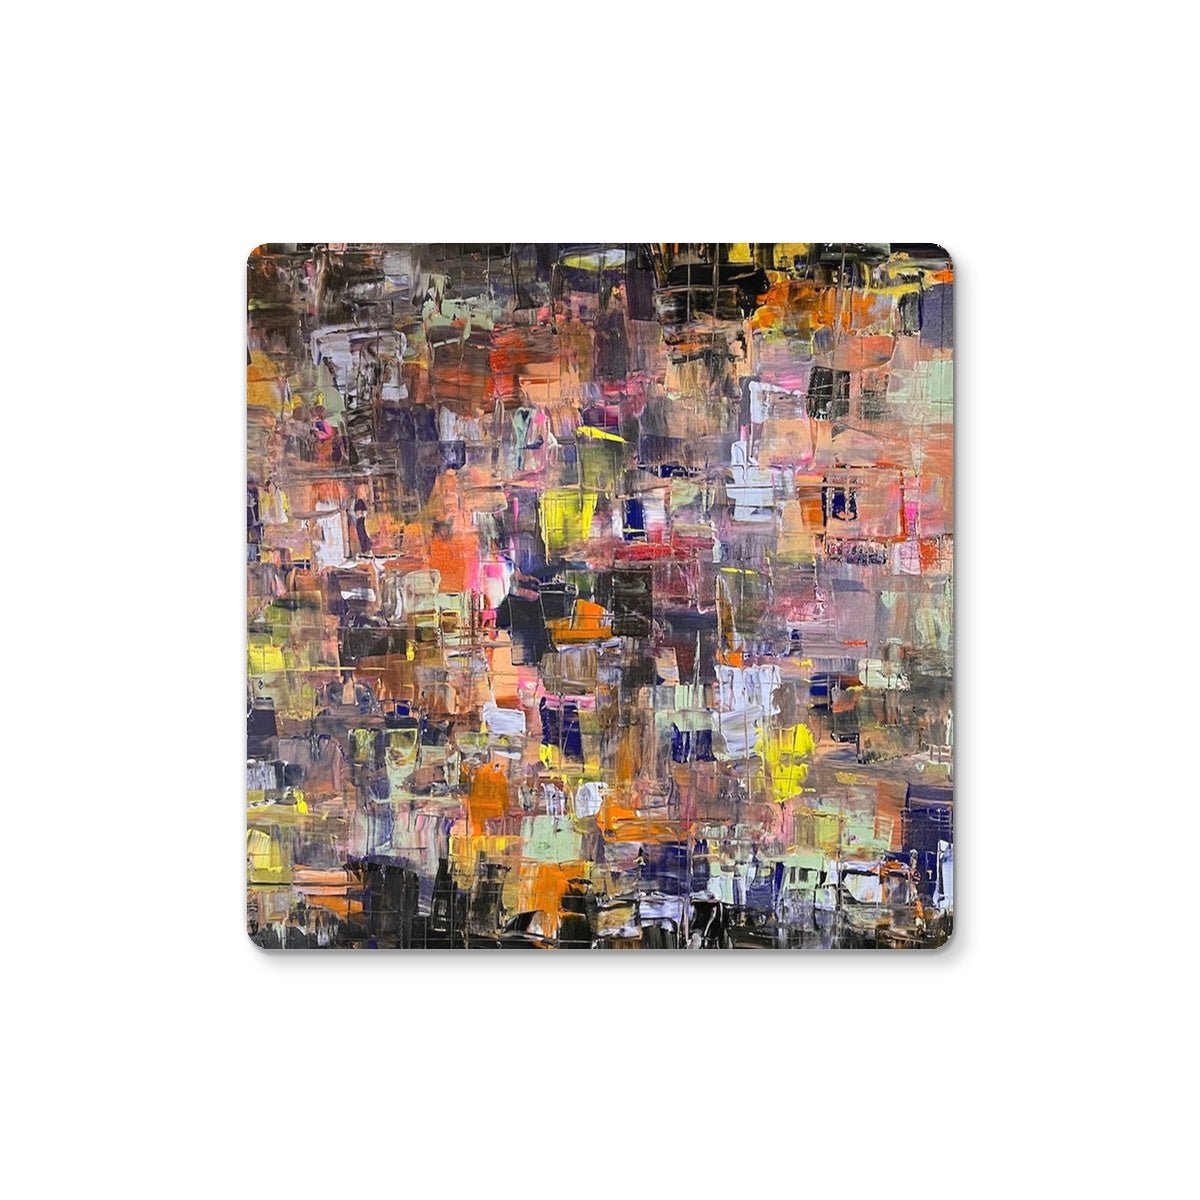 Never Enough Art Gifts Coaster-Coasters-Abstract & Impressionistic Art Gallery-2 Coasters-Paintings, Prints, Homeware, Art Gifts From Scotland By Scottish Artist Kevin Hunter